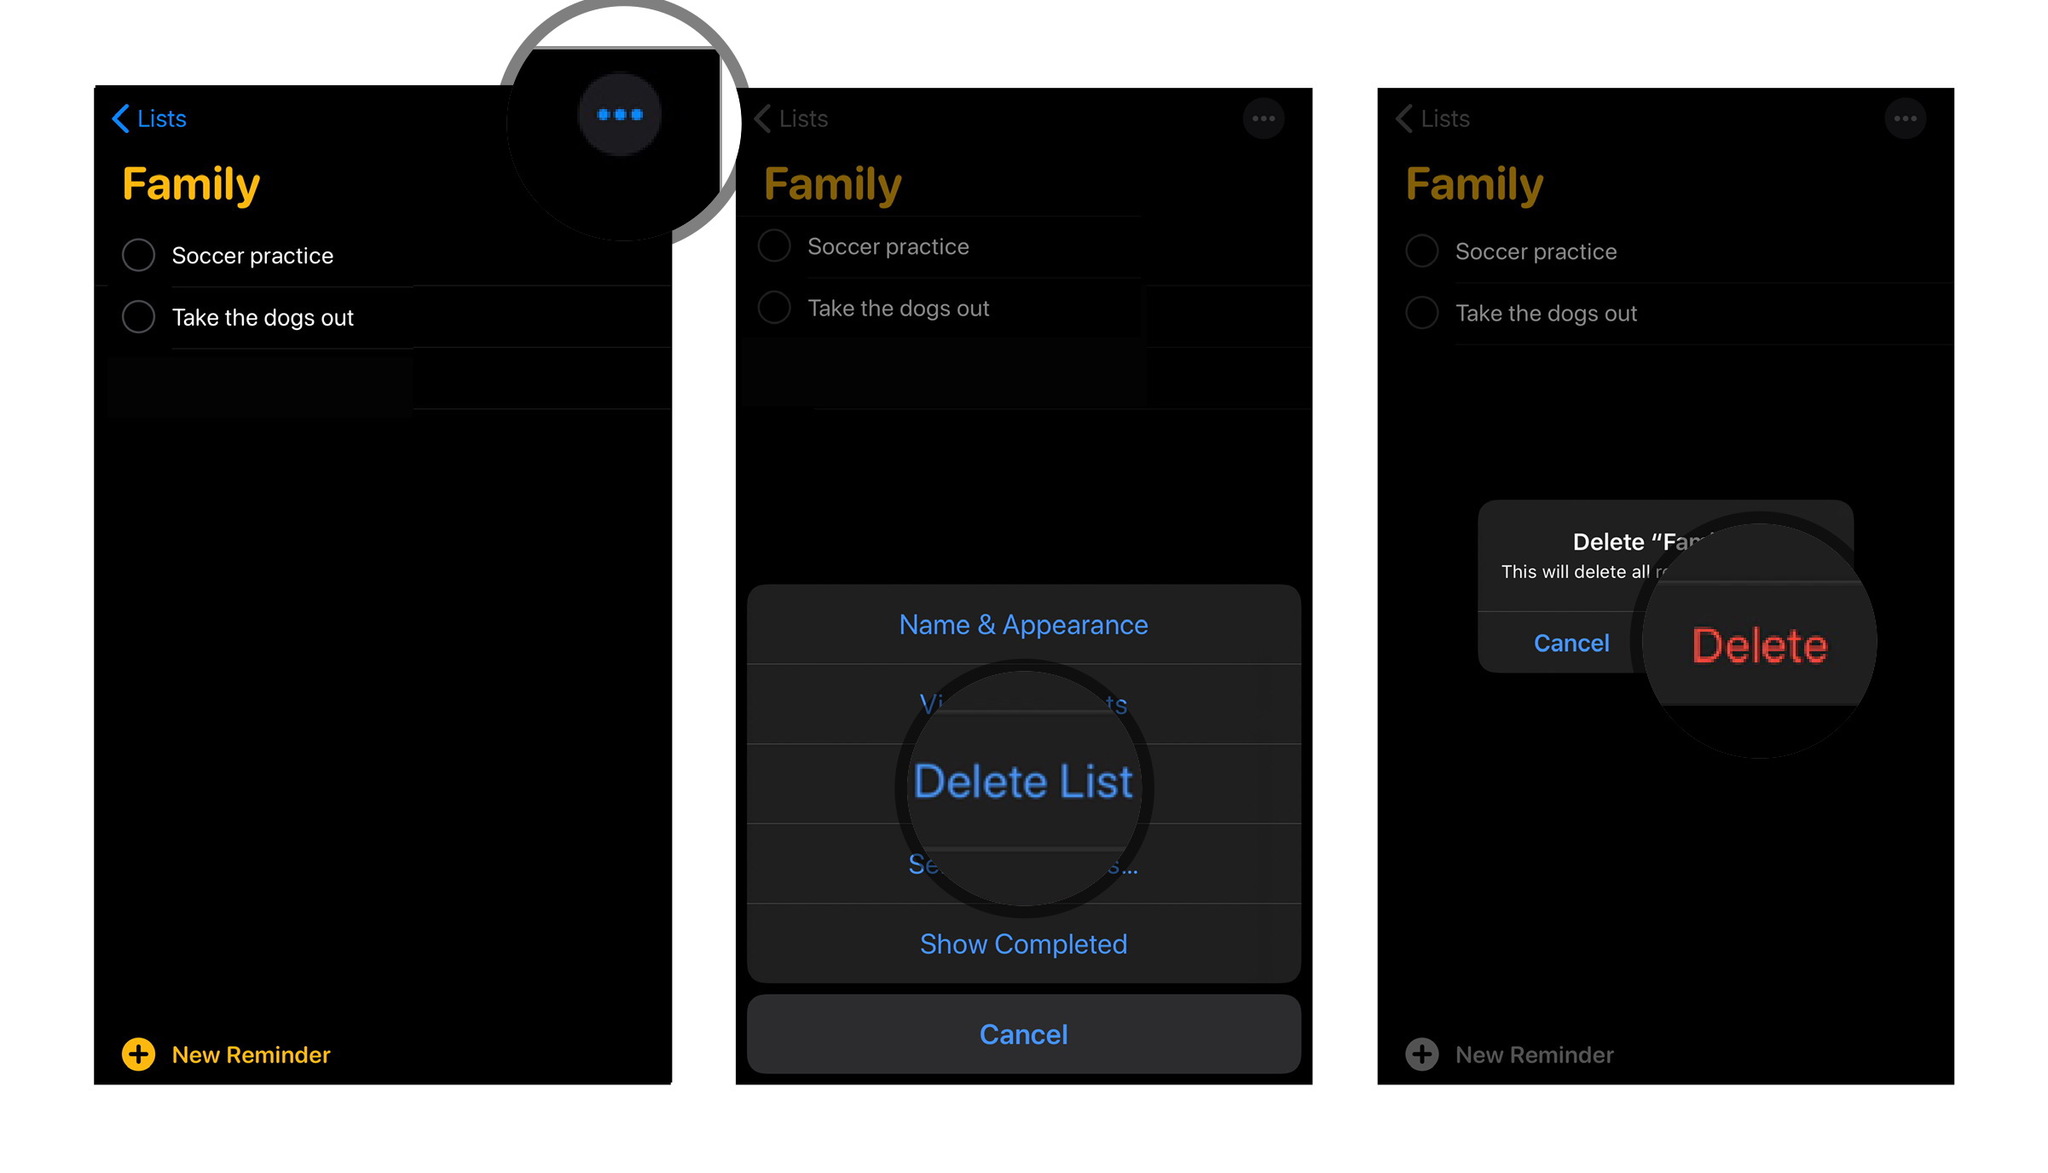 How to delete list: Tap on Family, Tap on the three dots, Tap Delete List and then confirm.